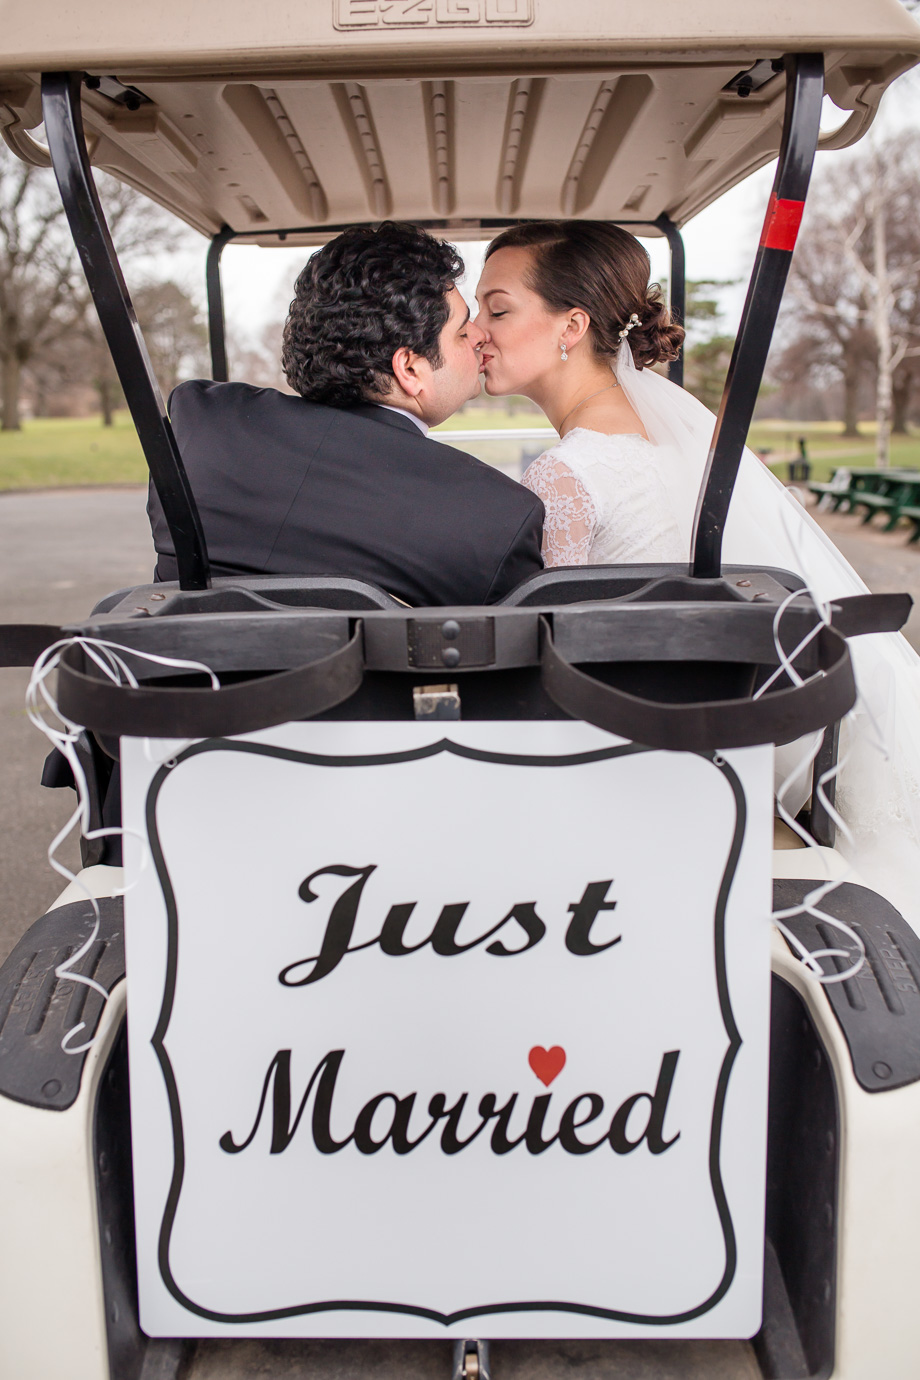 Just Married sign hanging at the back of a golf cart - Syker Beach Golf Club wedding